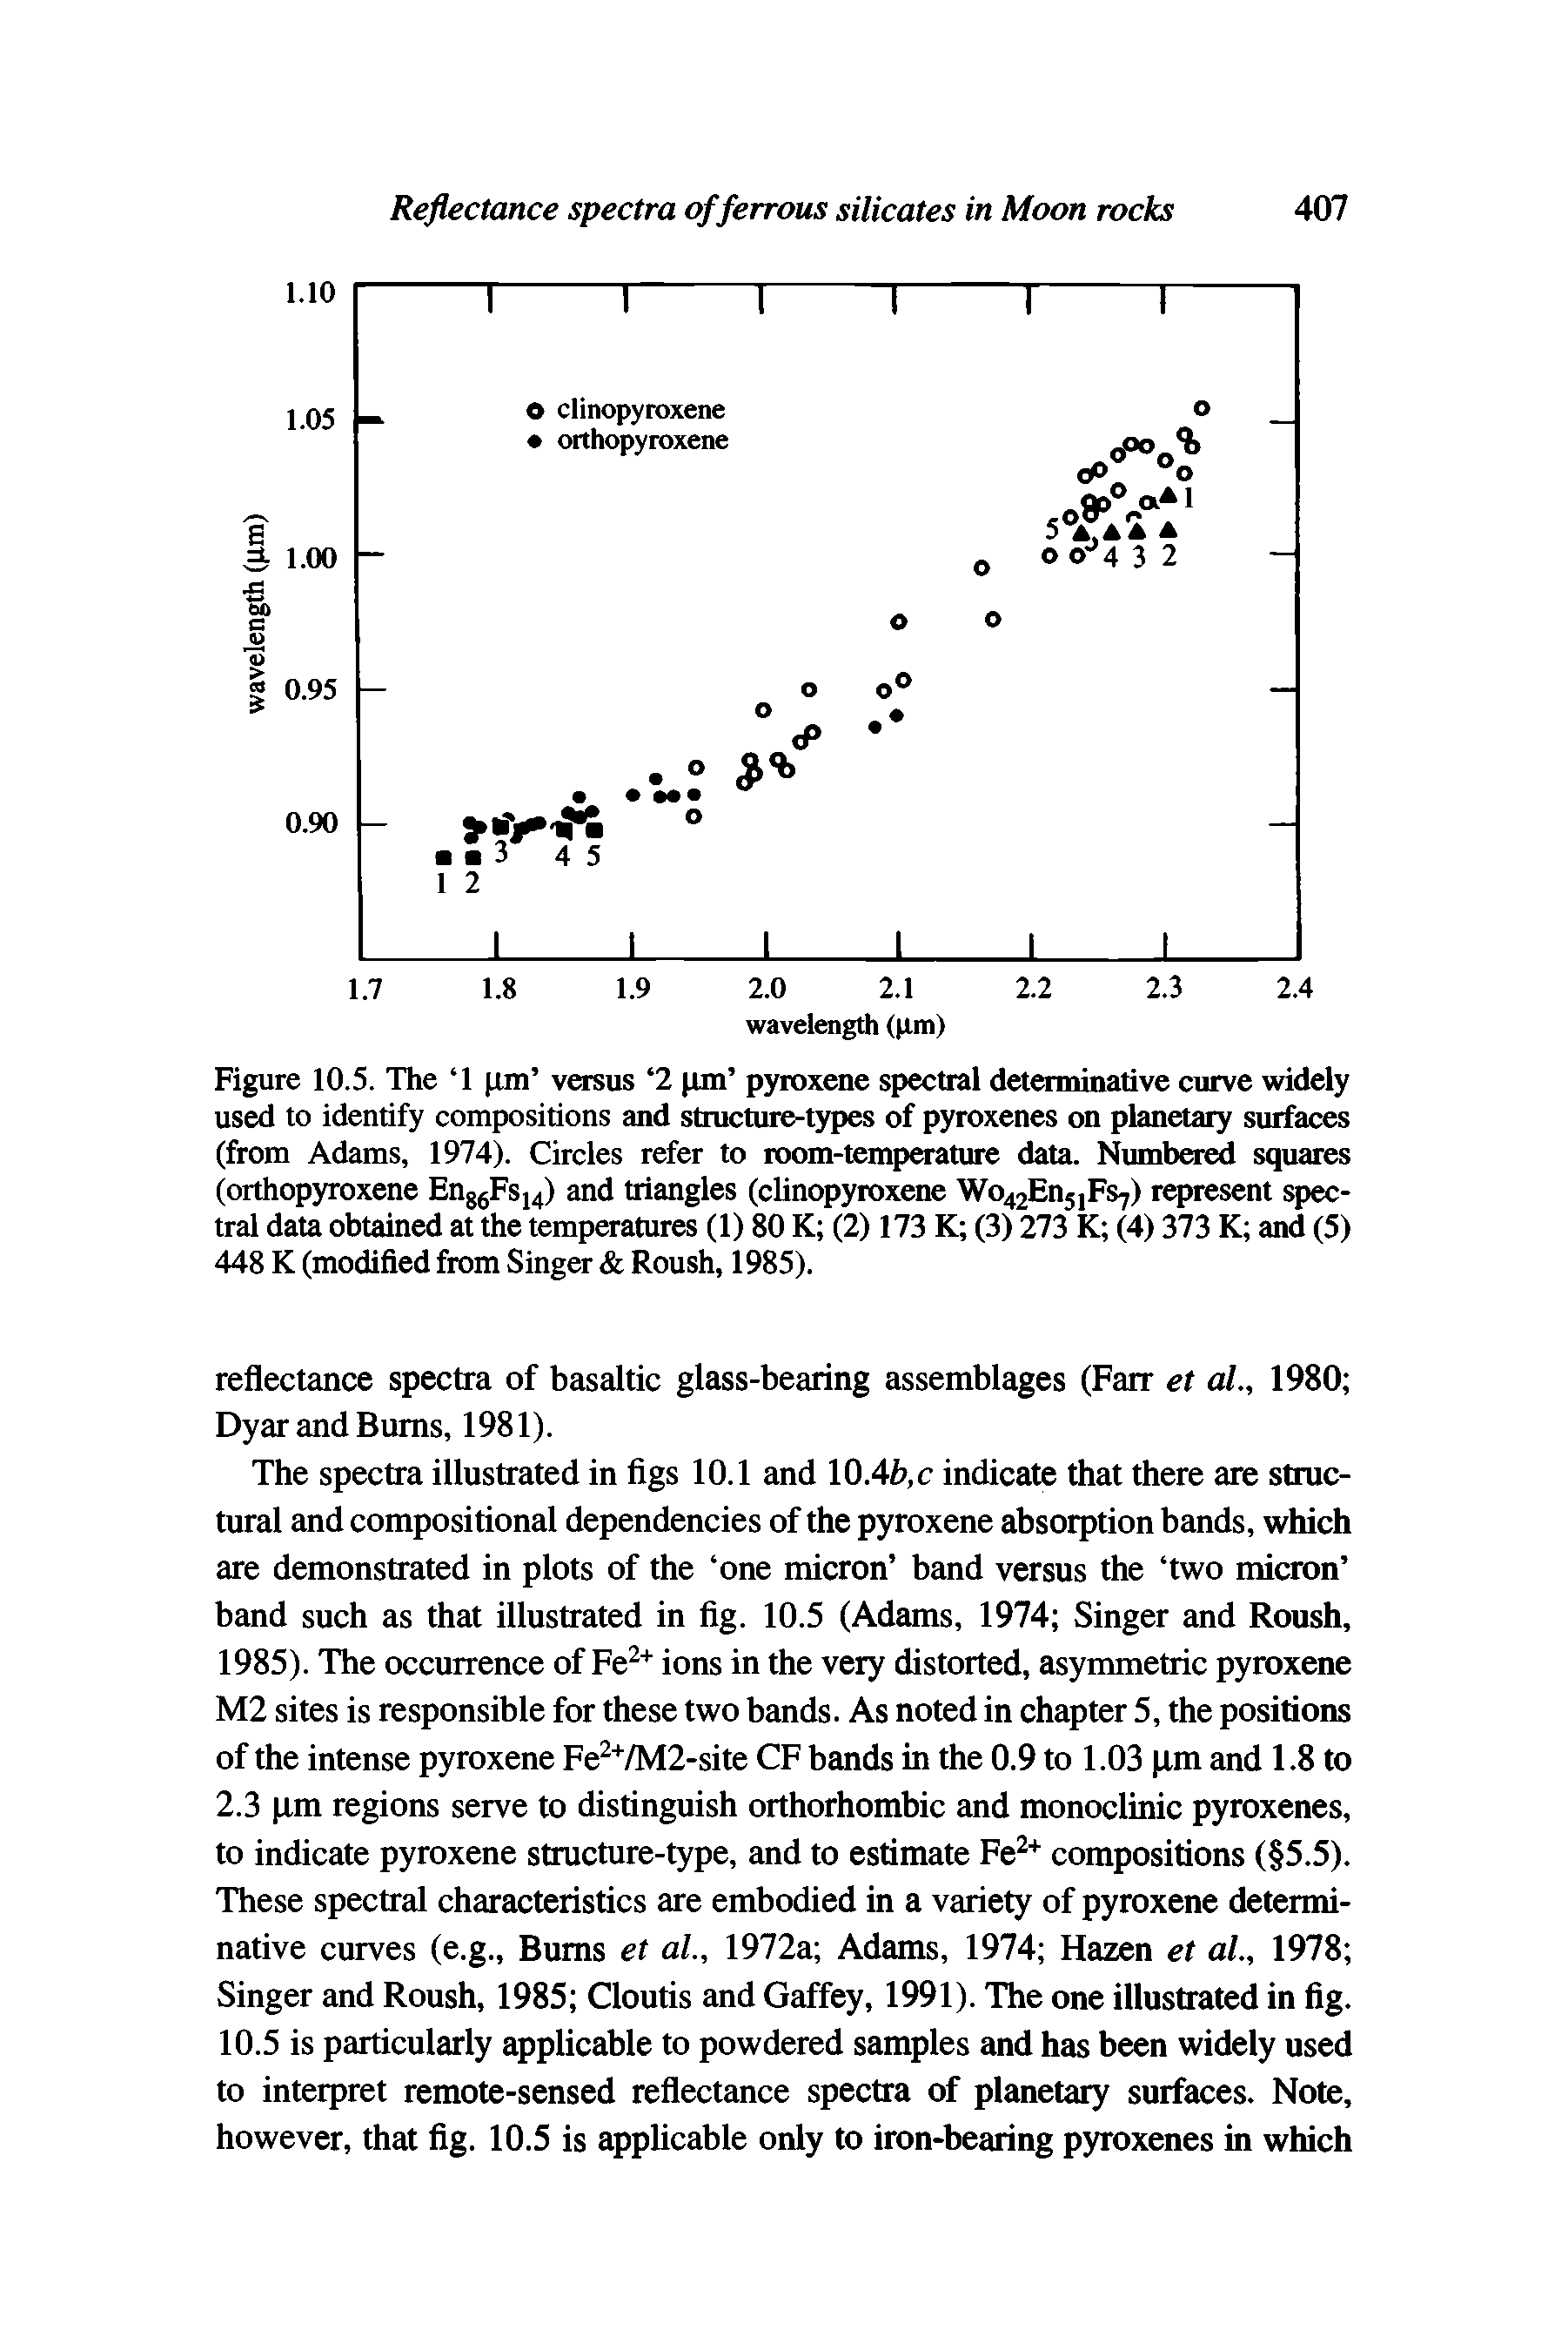 Figure 10.5. The 1 pm versus 2 pm pyroxene spectral determinative curve widely used to identify compositions and structure-types of pyroxenes on planetary surfaces (from Adams, 1974). Circles refer to room-temperature data. Numbered squares (orthopyroxene En86Fs14) and triangles (clinopyroxene Wo42En51Fs7) represent spectral data obtained at the temperatures (1) 80 K (2) 173 K (3) 273 K (4) 373 K and (5) 448 K (modified from Singer Roush, 1985).